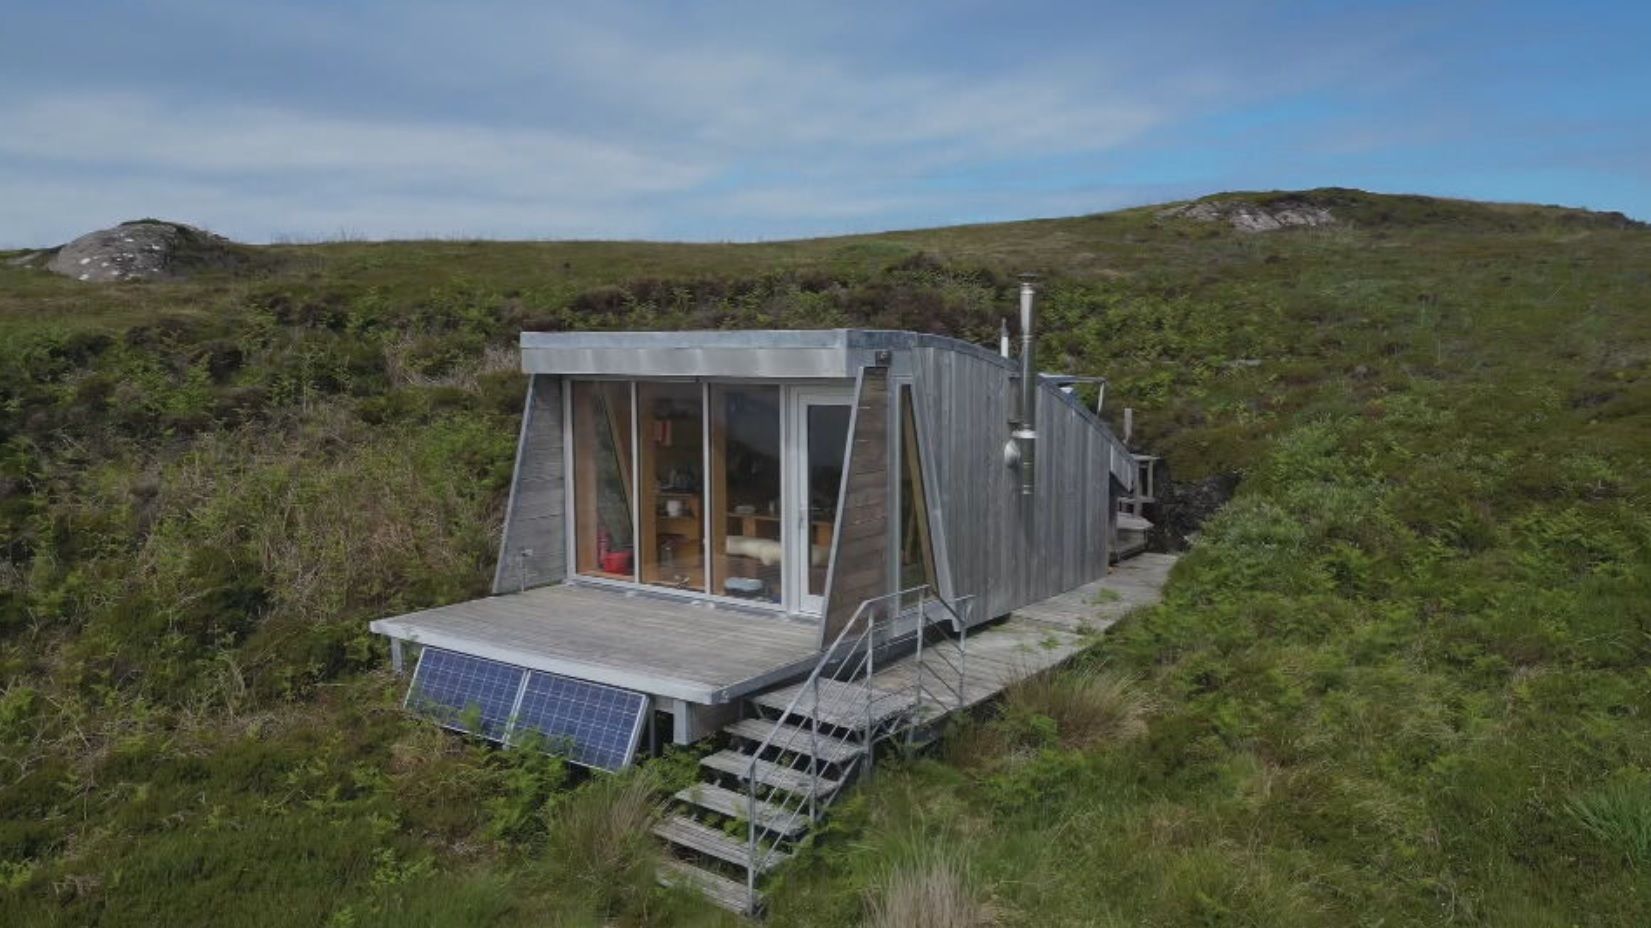 A specially built cabin on the island offers shelter for visitors stranded on the island